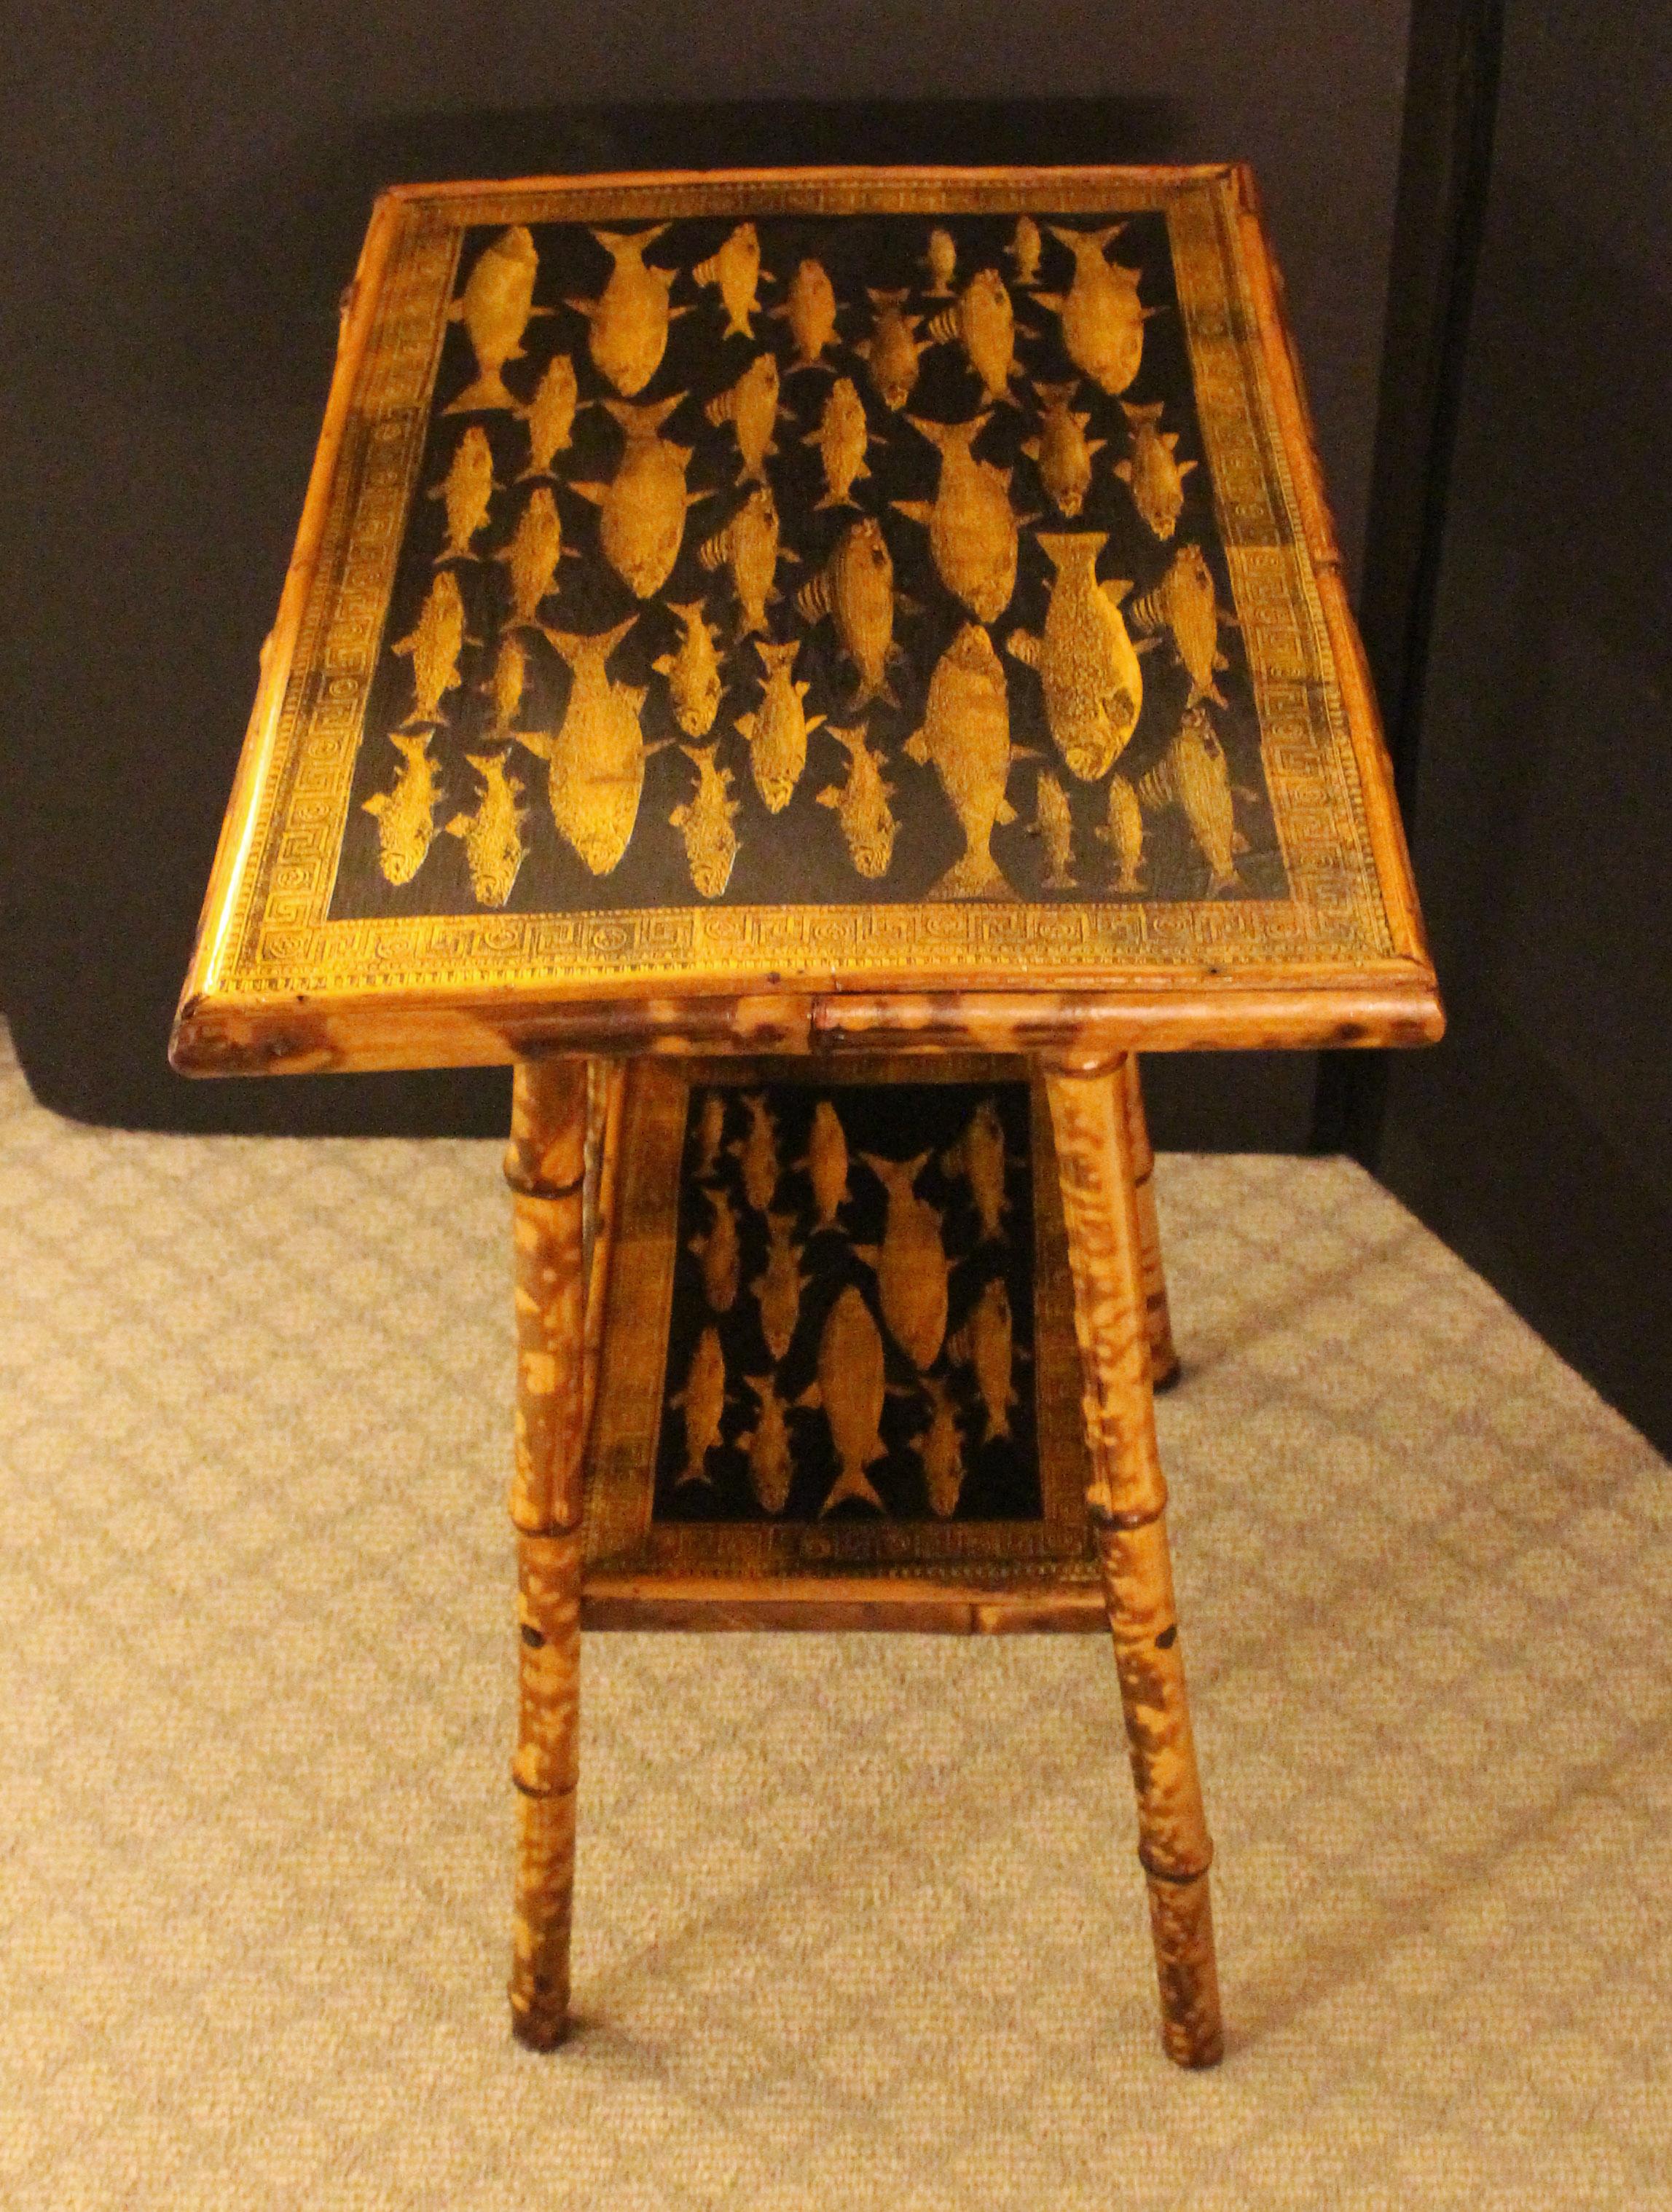 Late 19th century English 2-tier bamboo rectangular side table. The surfaces now decoupaged with fish & Greek key borders. Well figured bamboo.
20.5